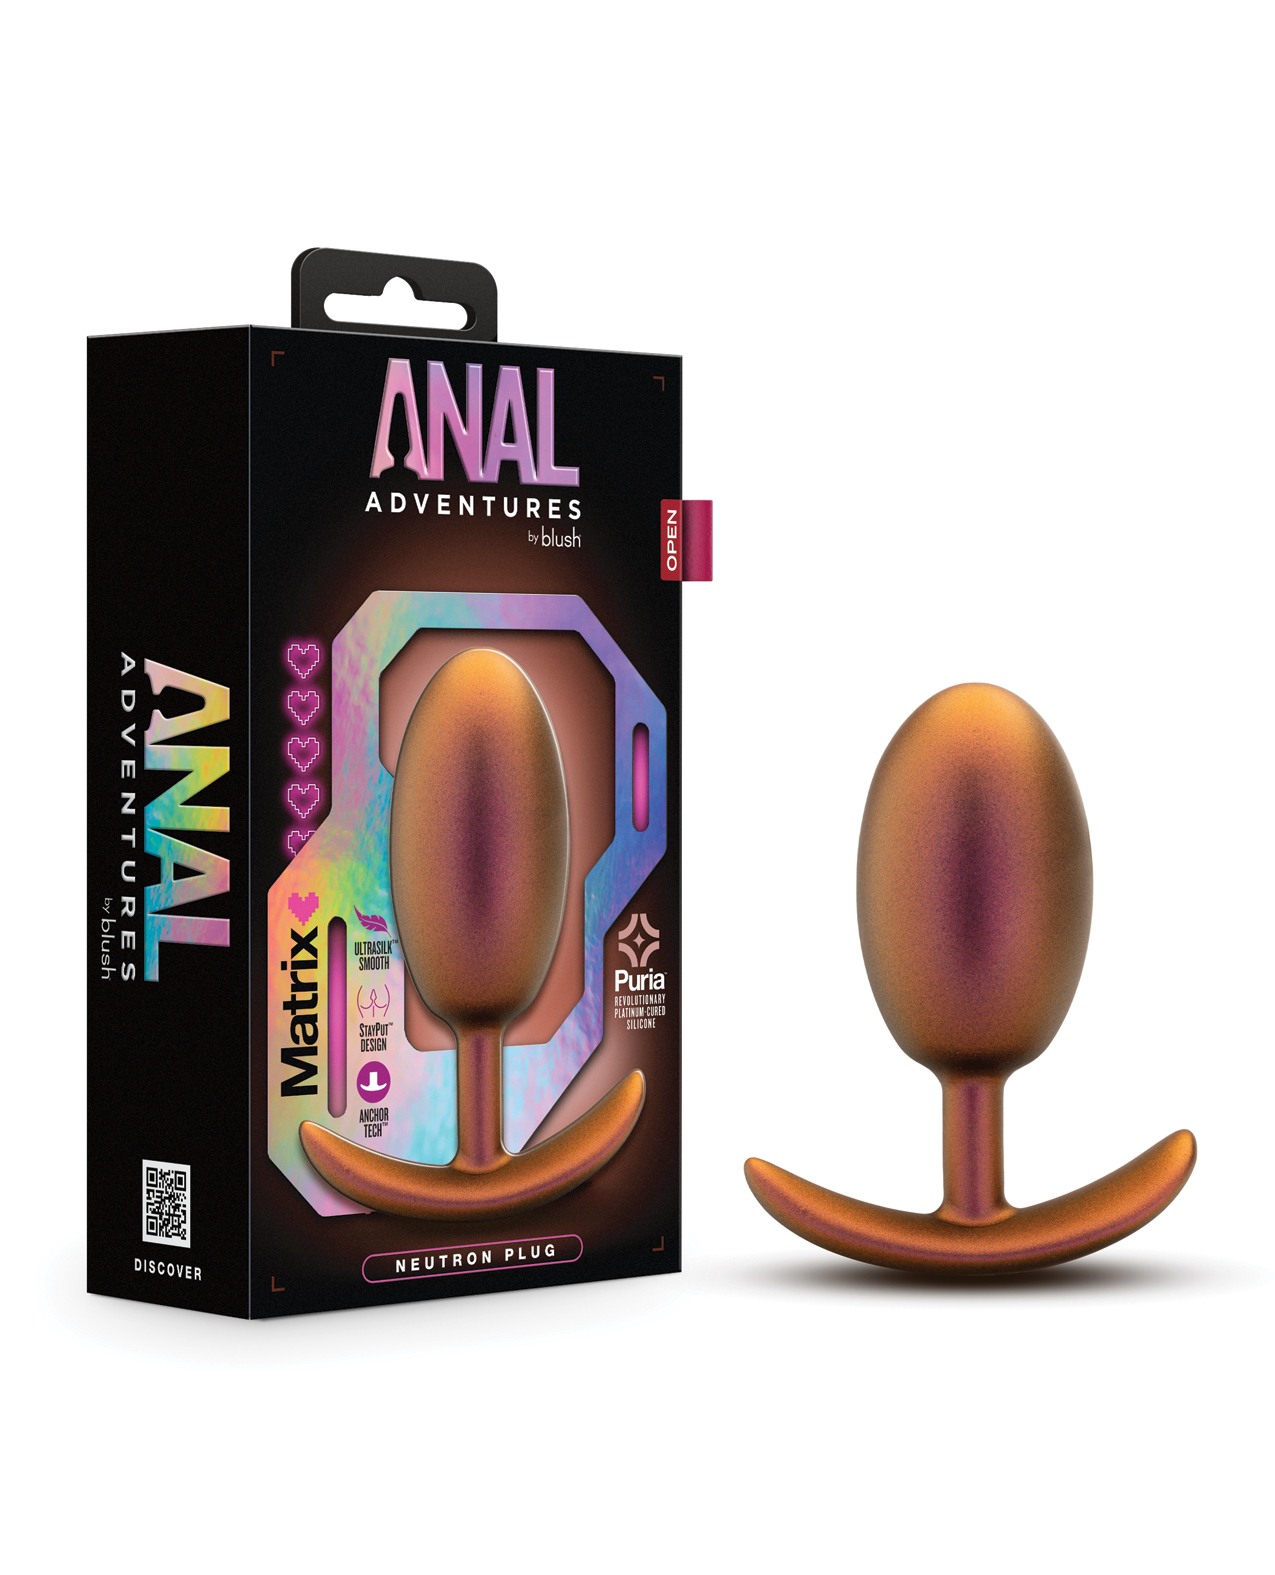 Copper colored butt plug sits besides its packaging